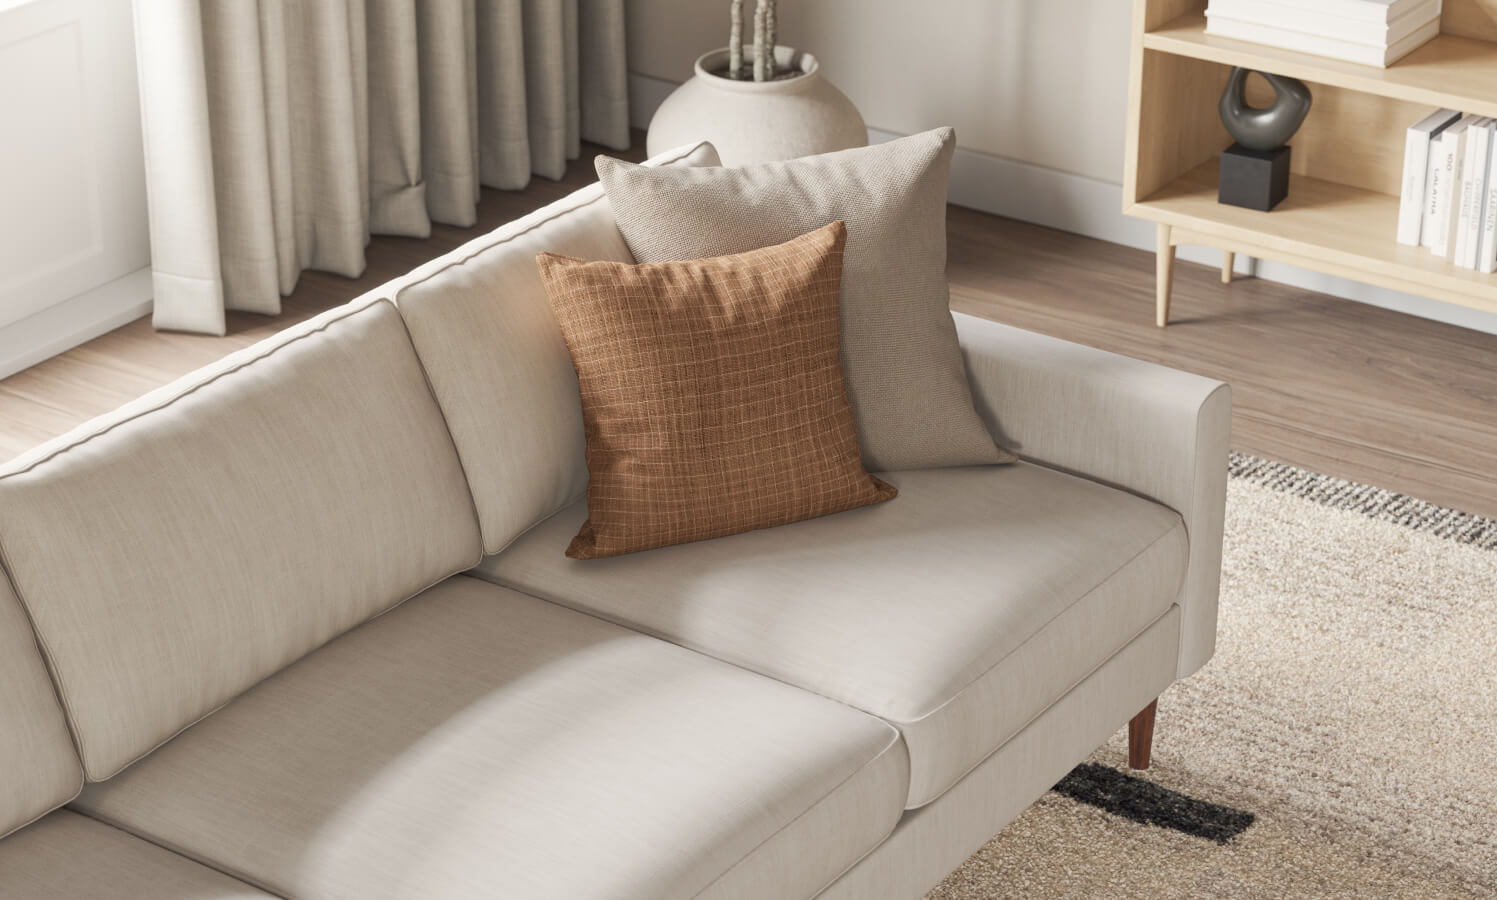 IRL: Lala sofa in beige fabric with orange pillow